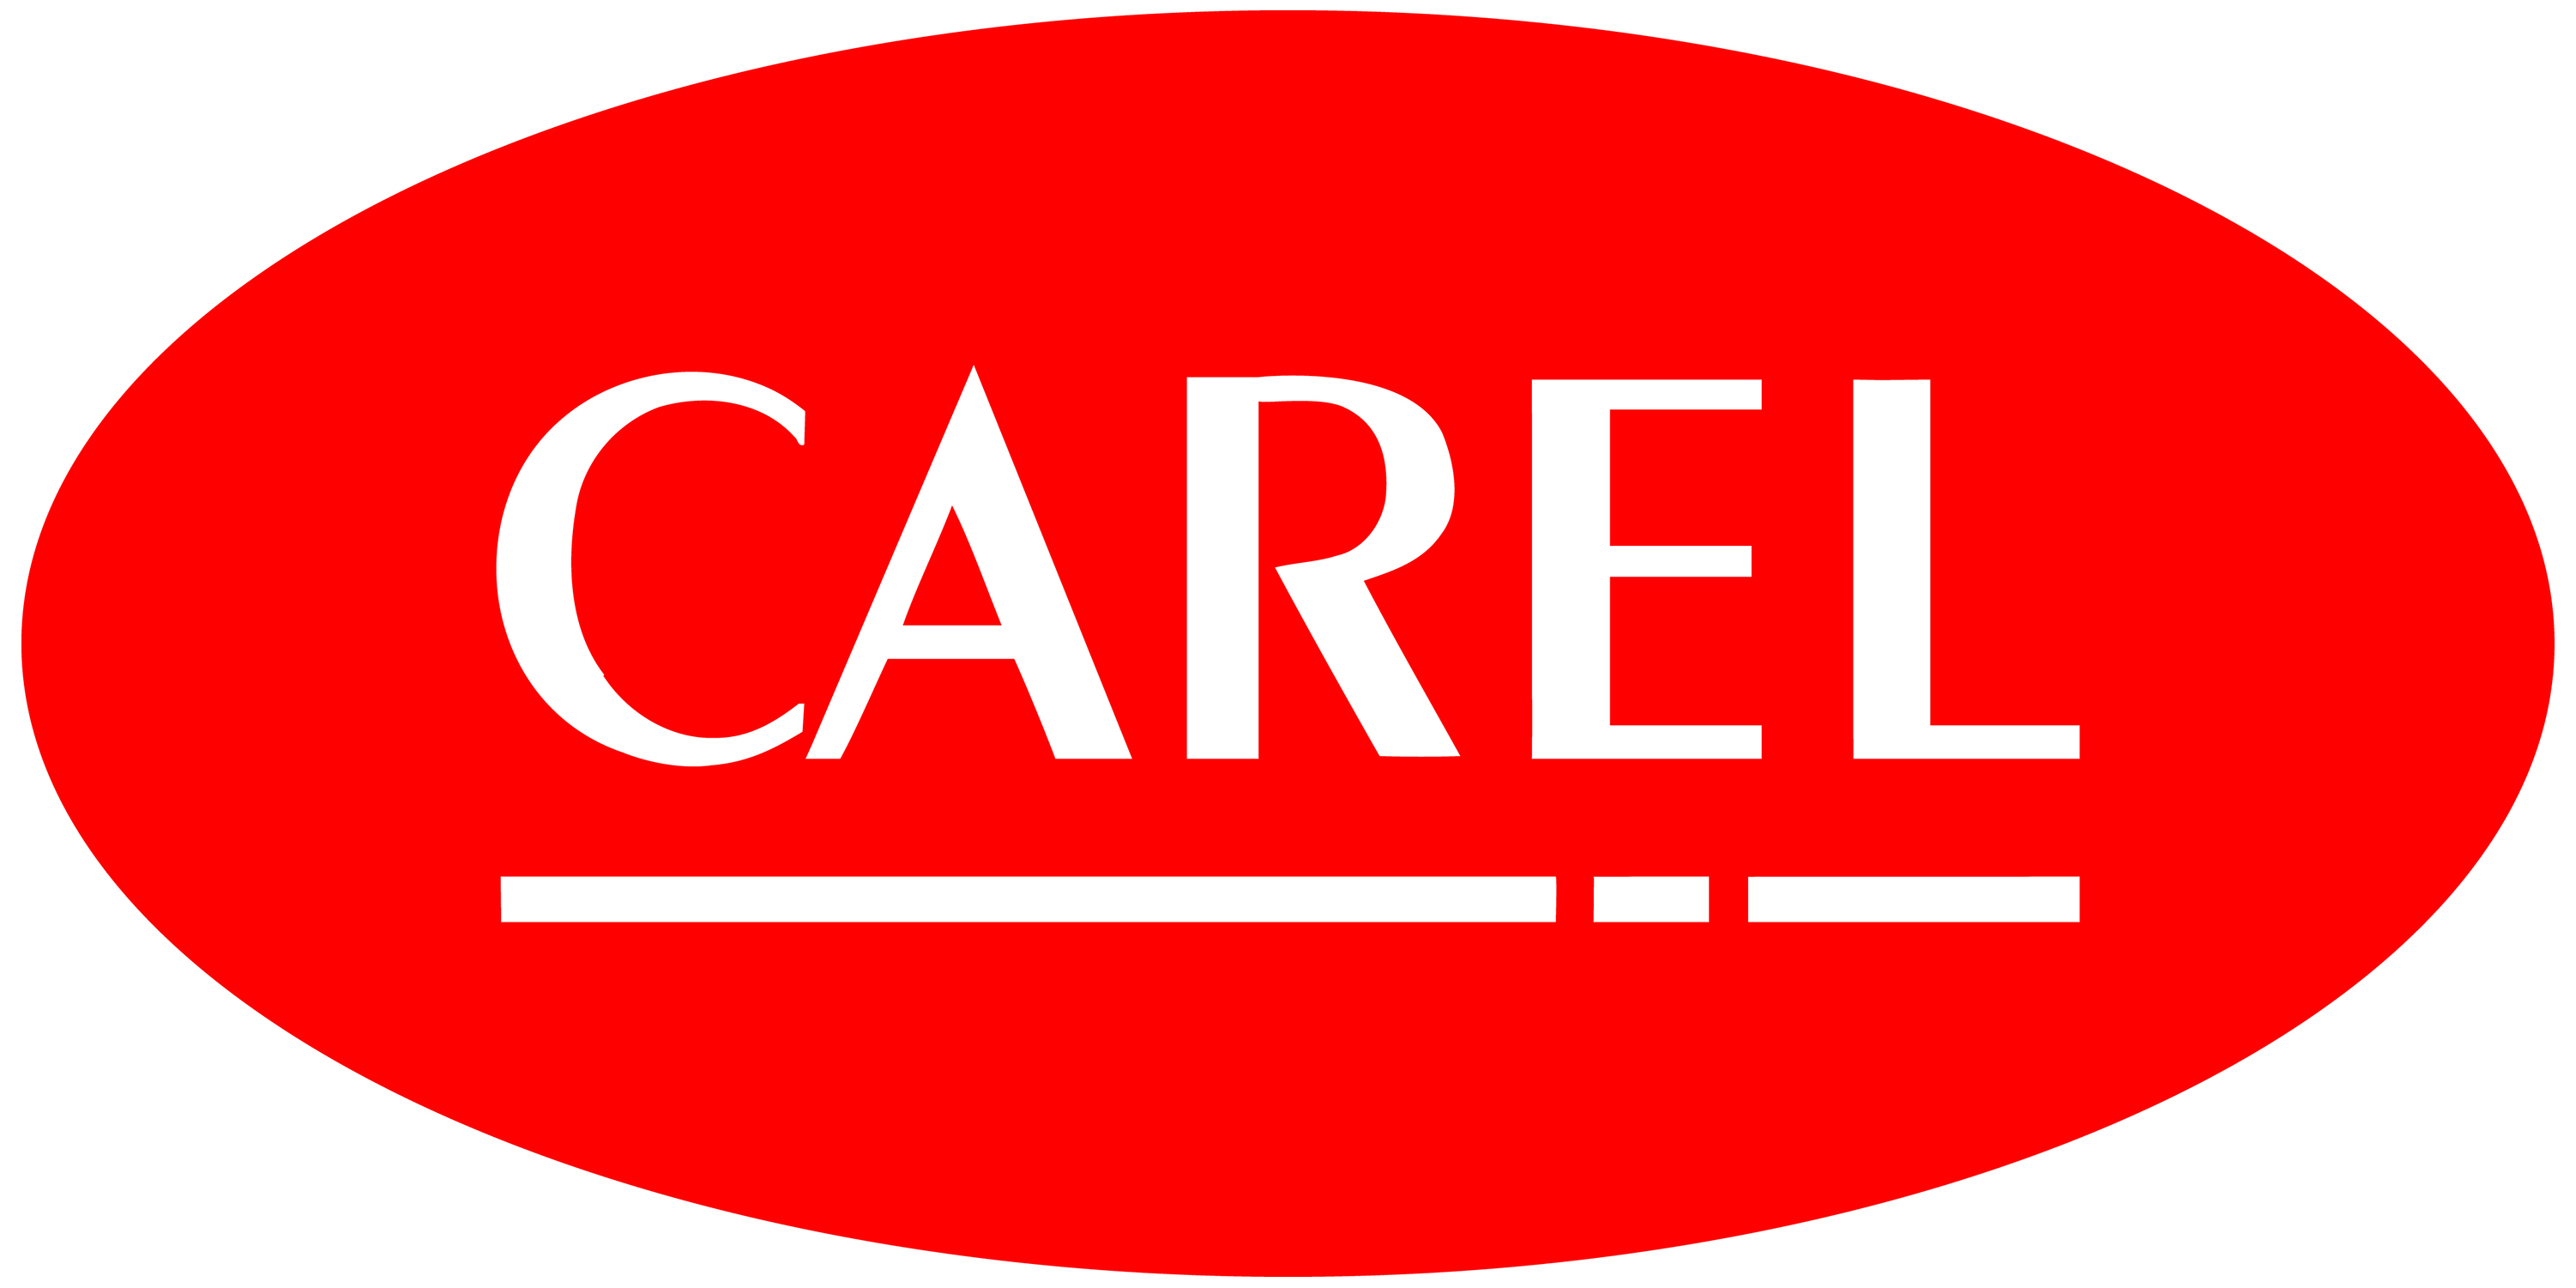 CAREL worldwide branches